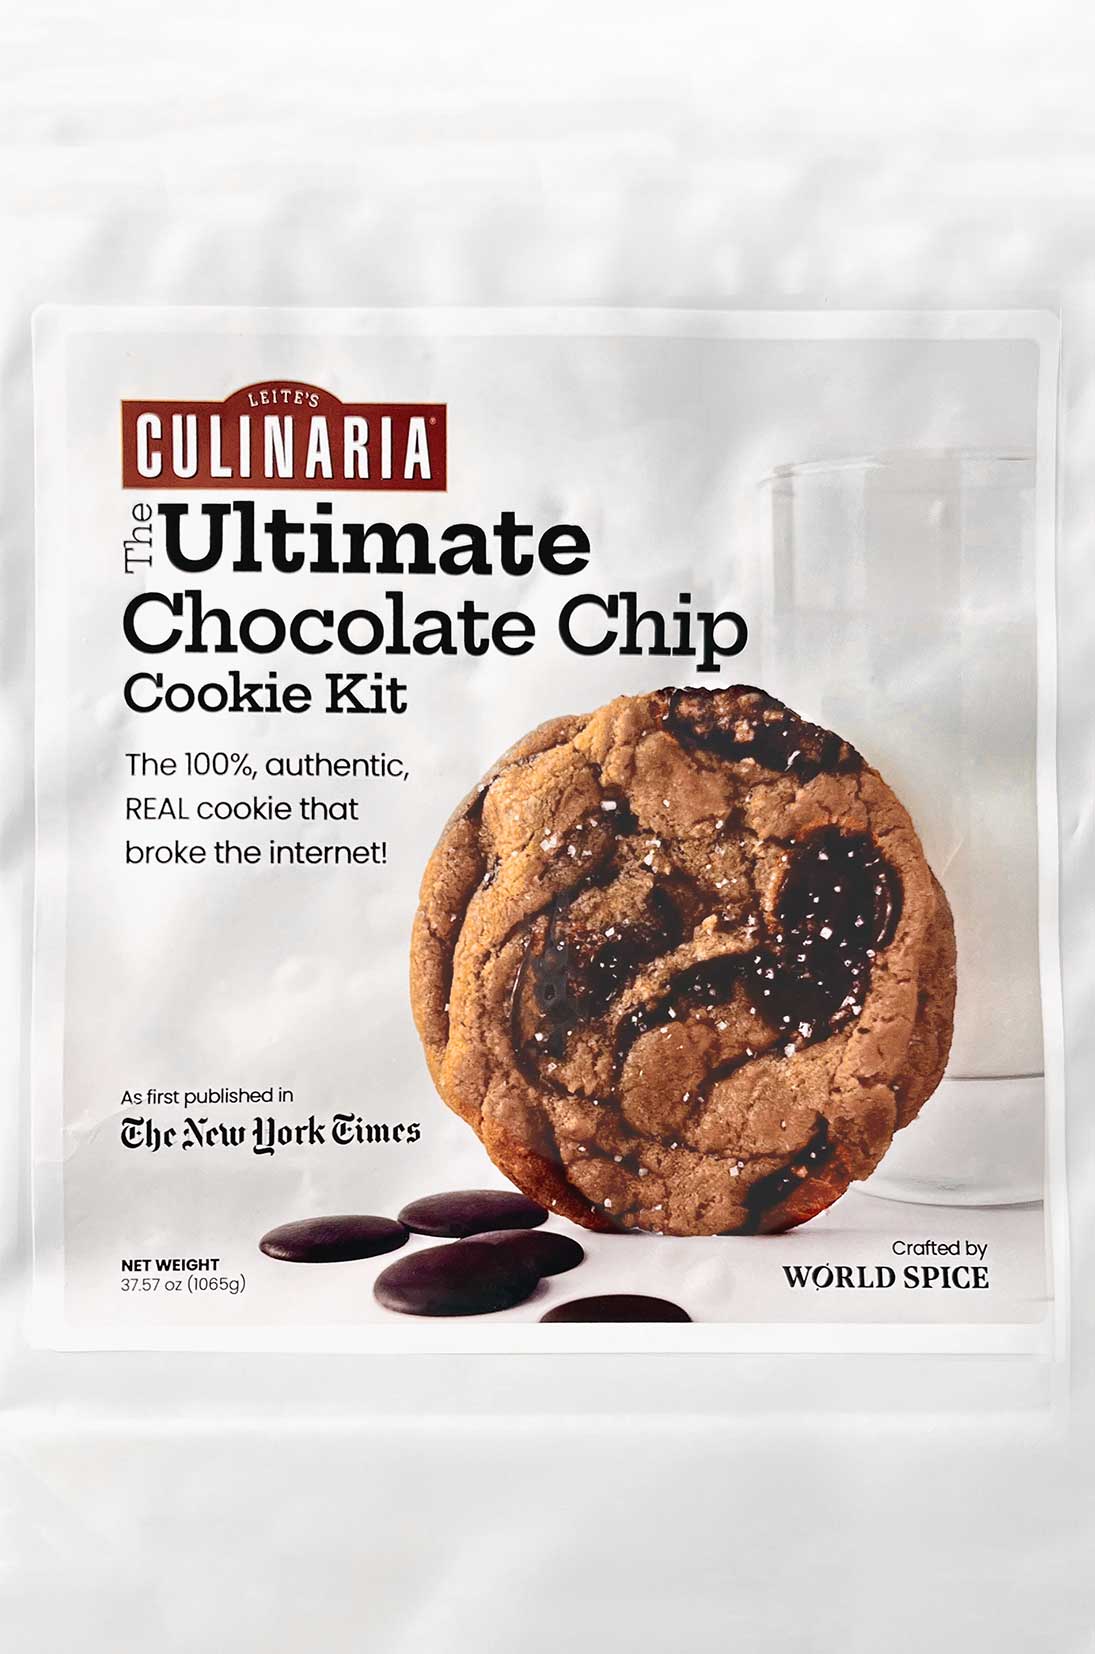 A bag of Leite's Culinaria Ultimate Chocolate Chip Cookie Mix.